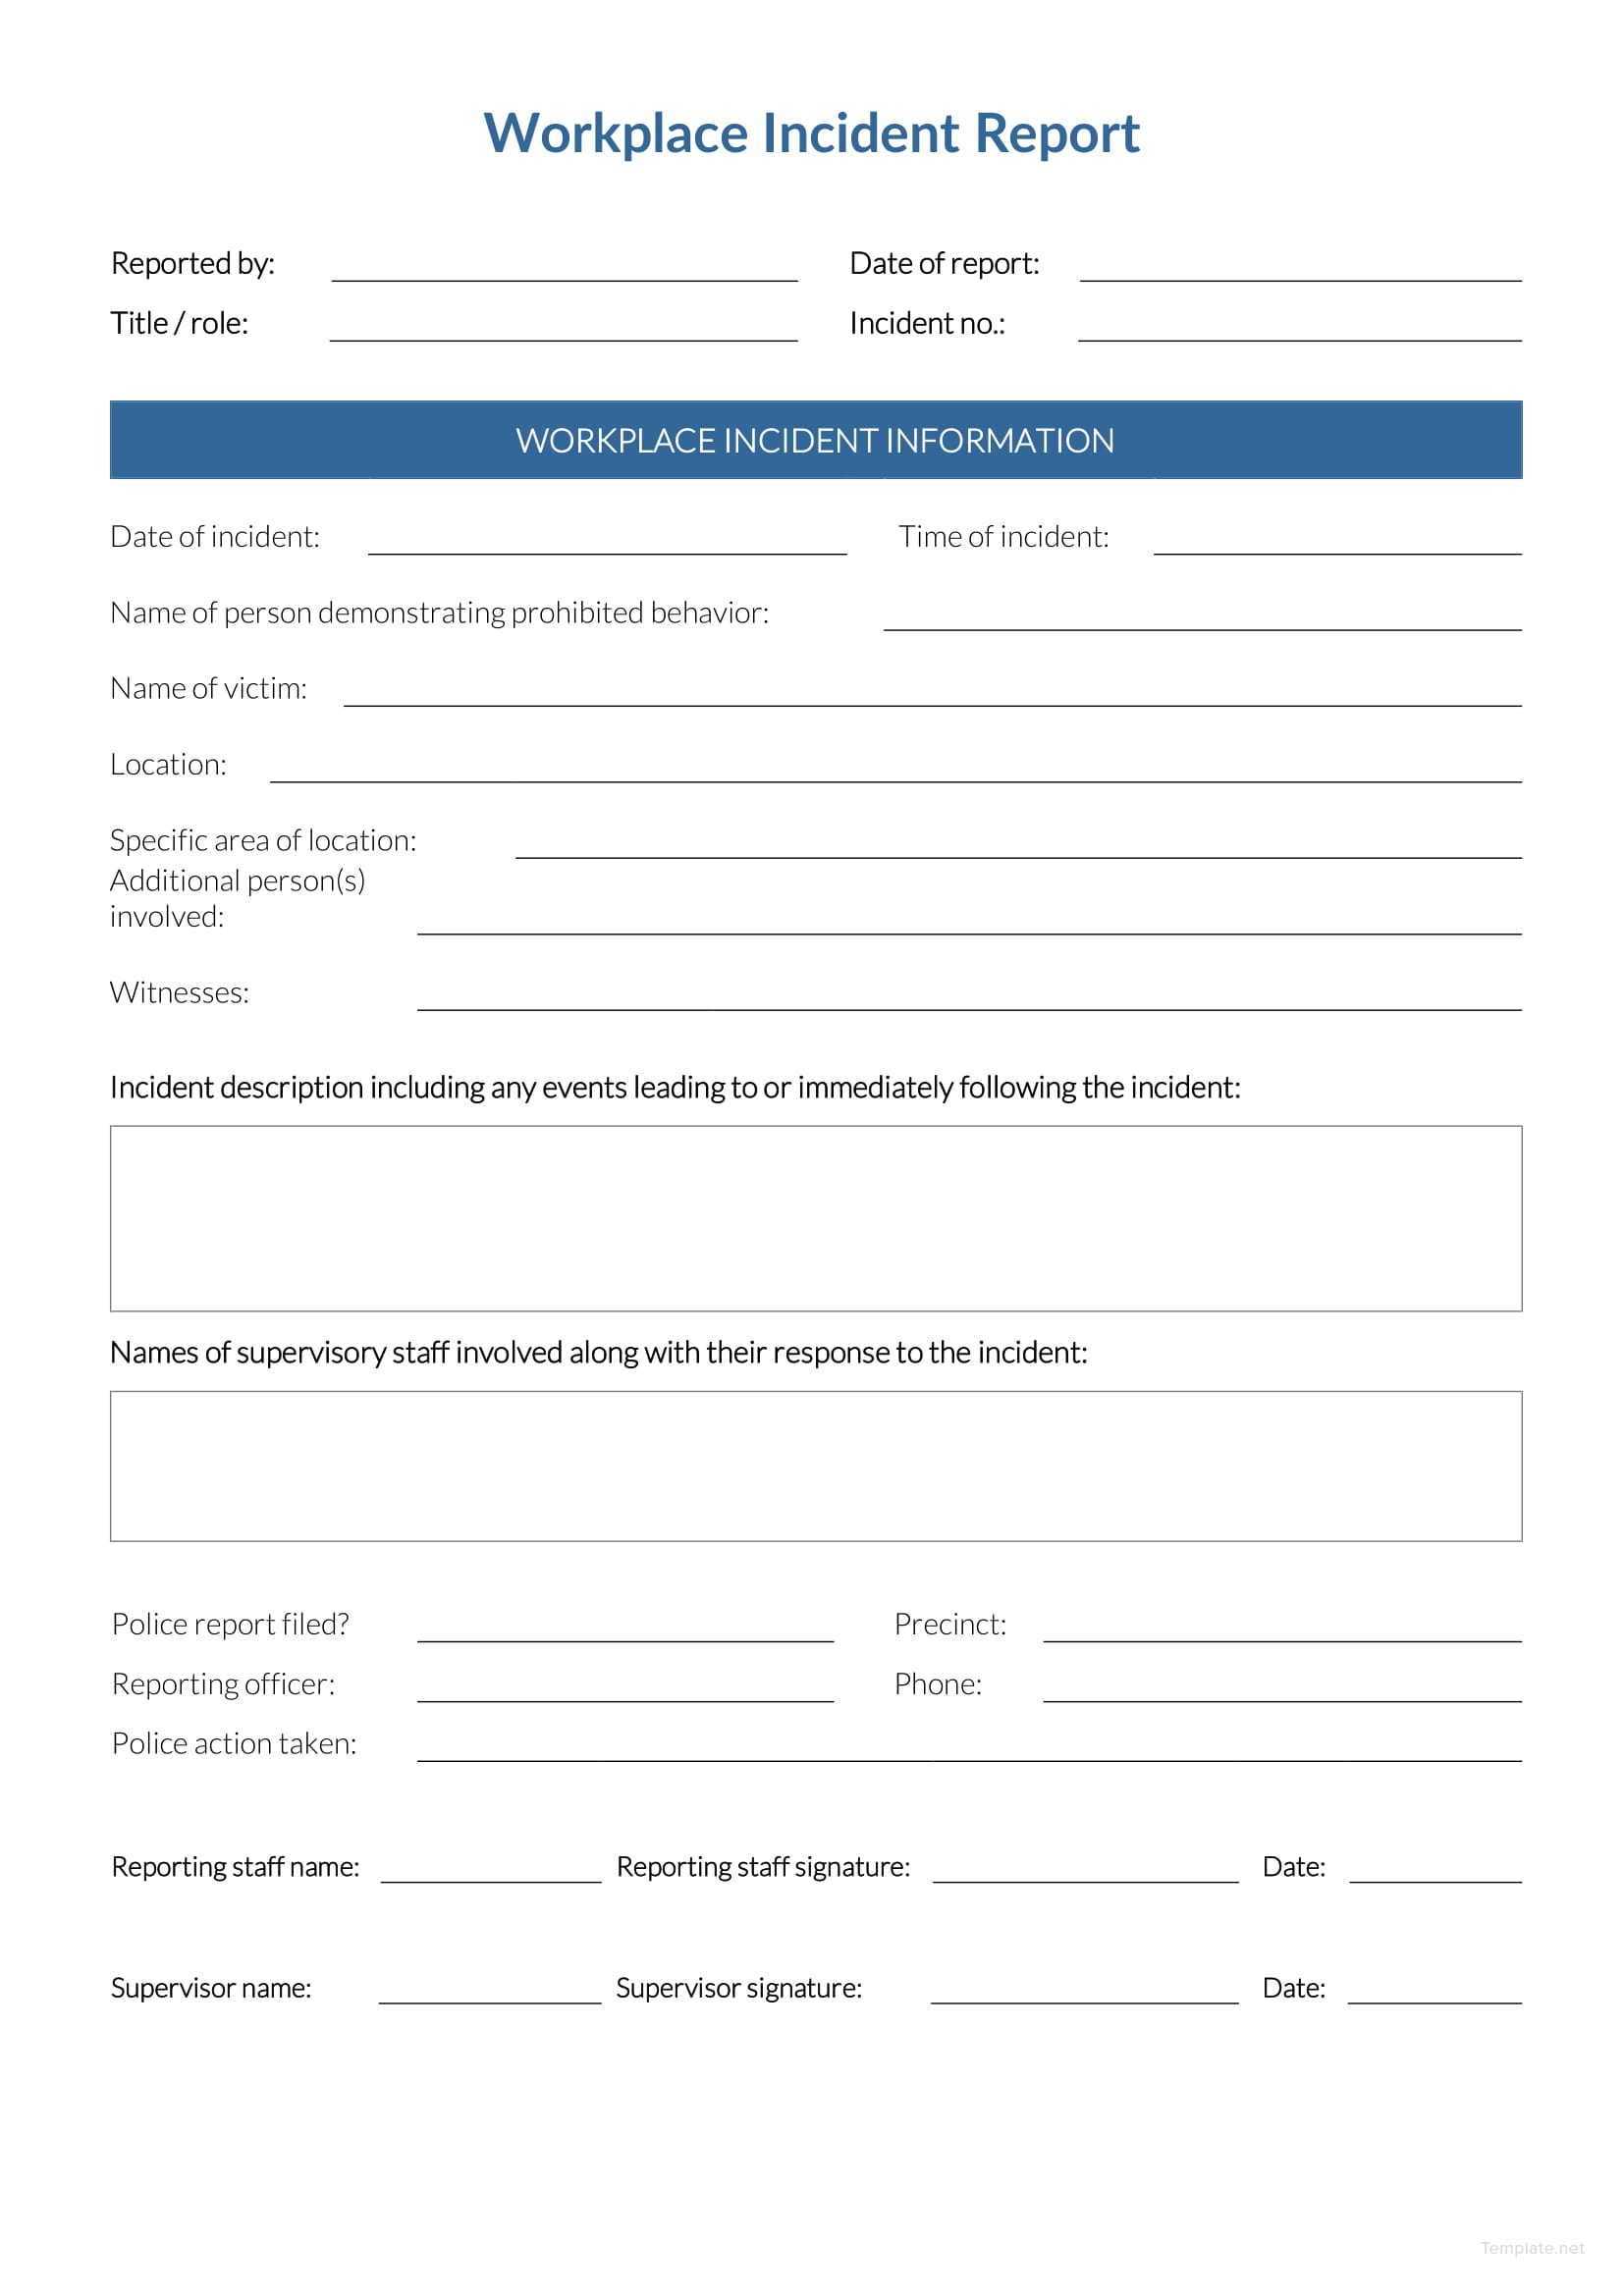 Free Workplace Incident Report | Data Form | Incident Report Within Office Incident Report Template